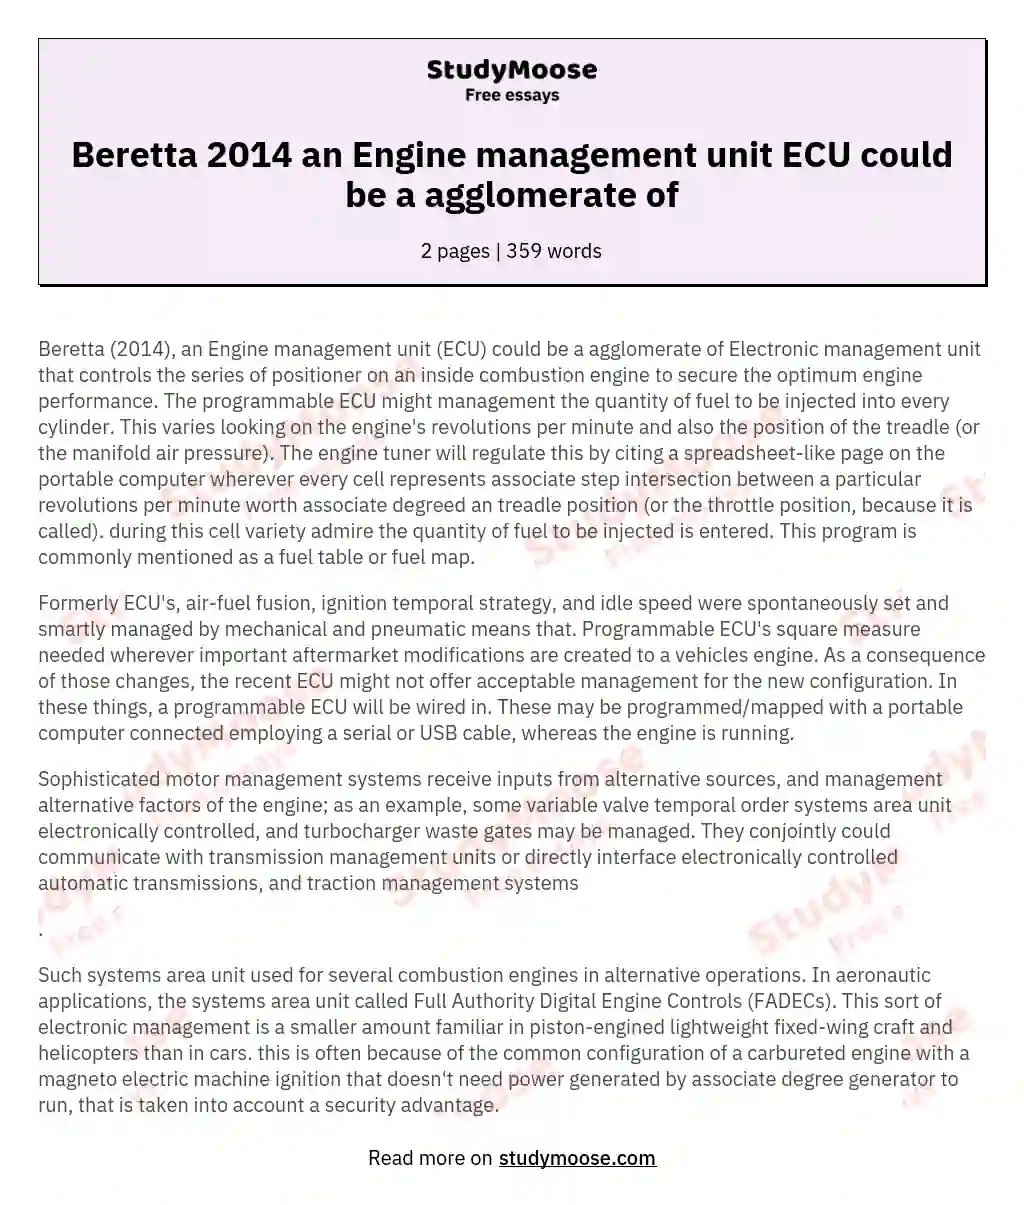 Beretta 2014 an Engine management unit ECU could be a agglomerate of essay